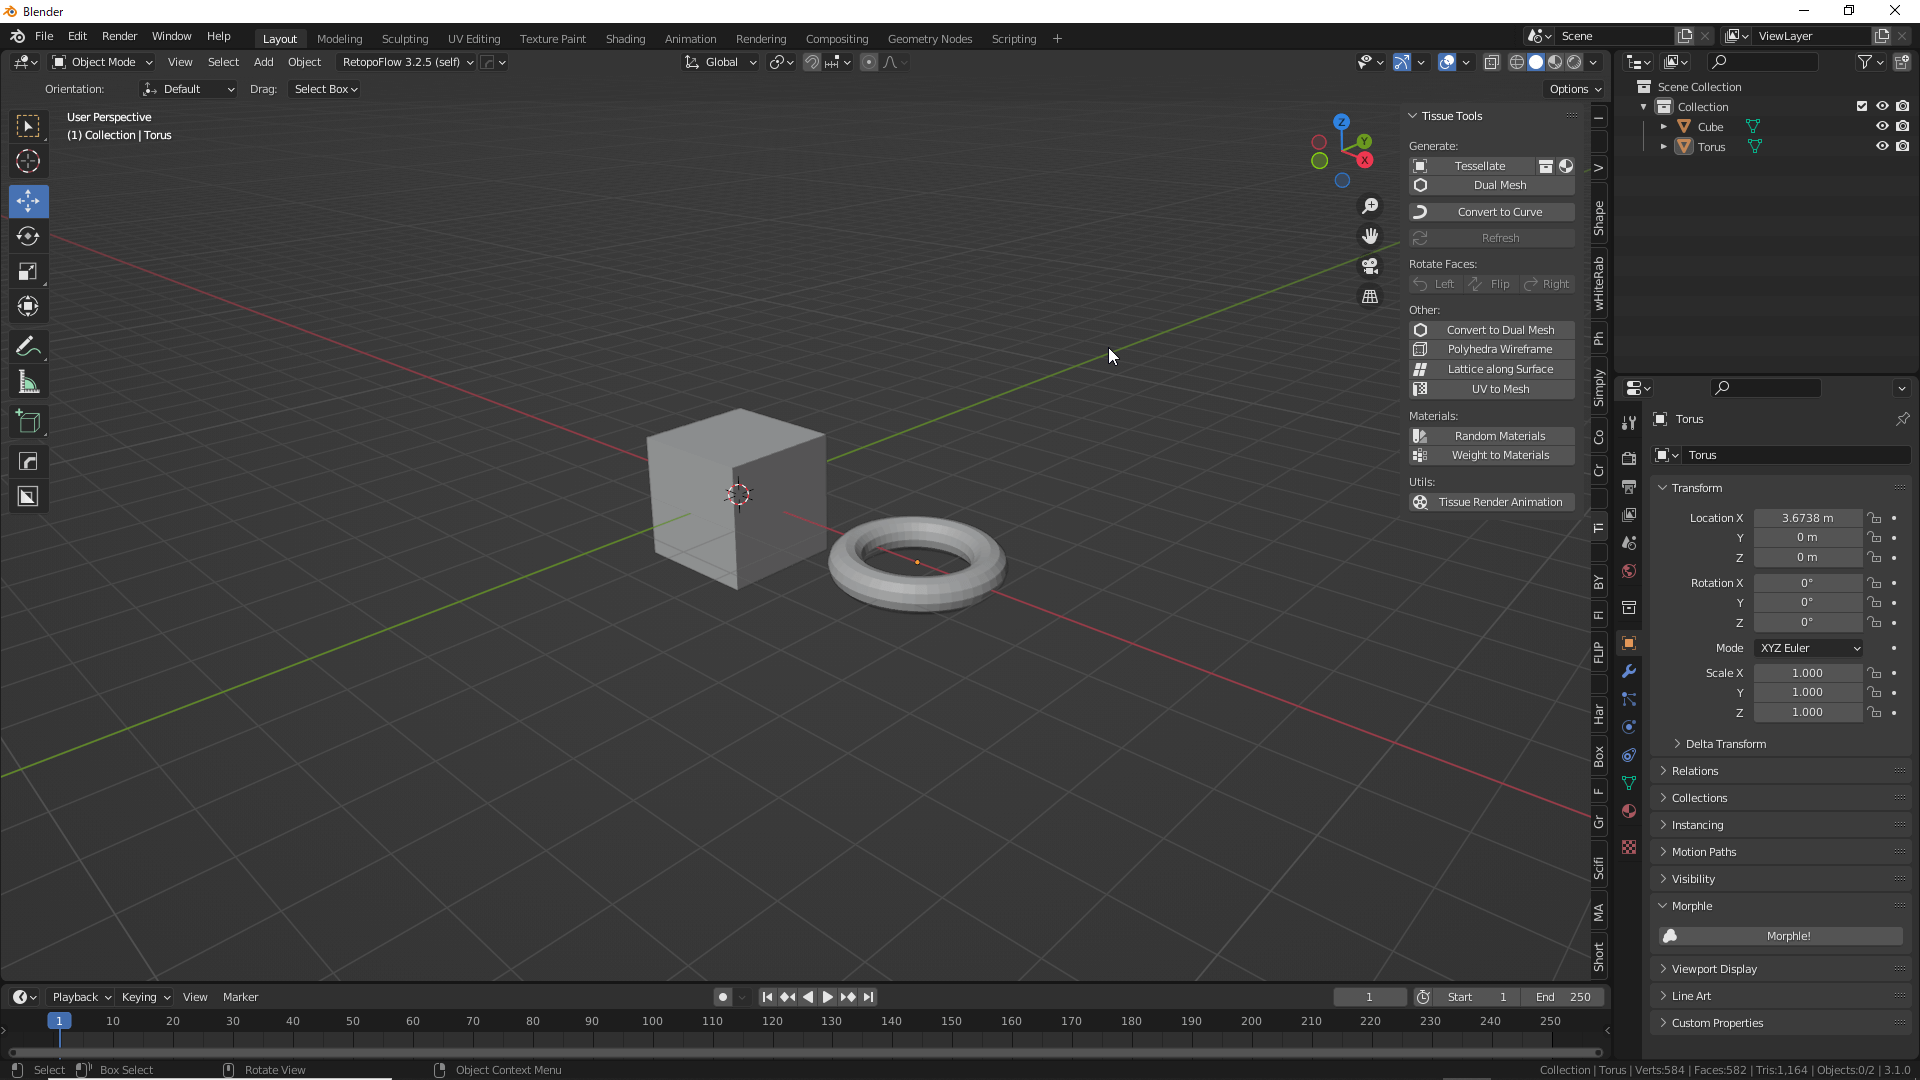 Shift+[A] to add an object